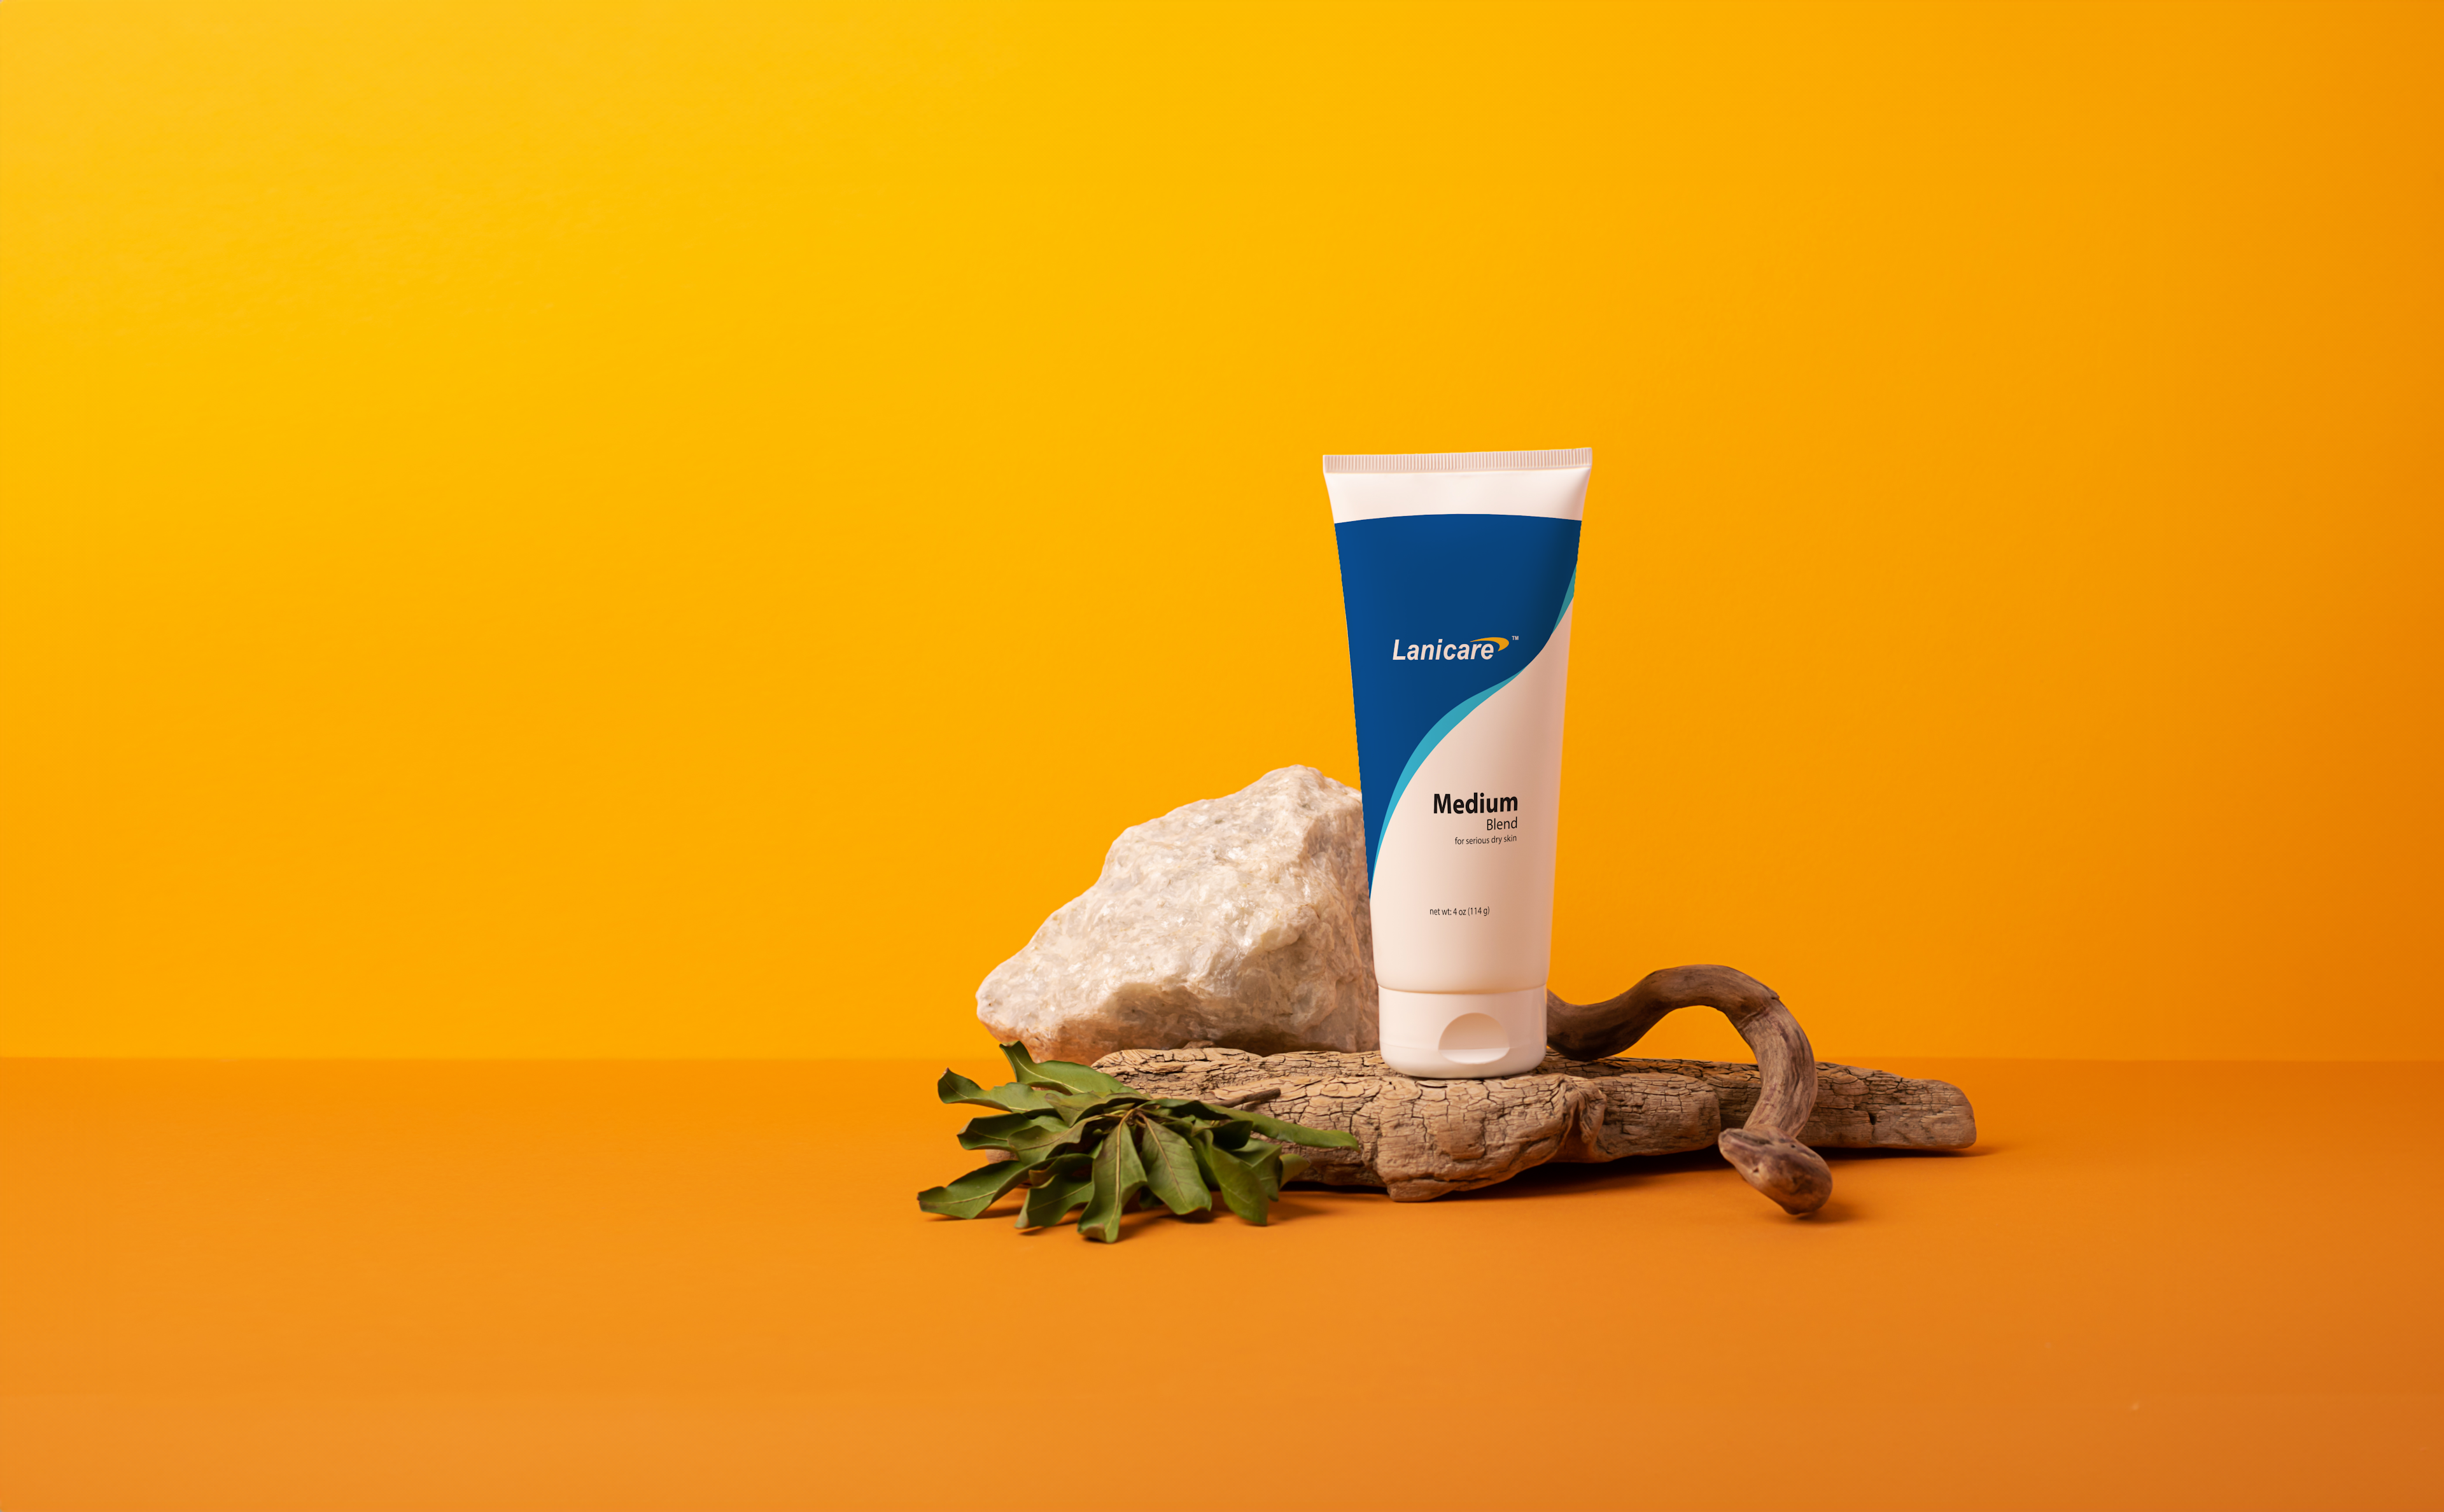 picture of the Laicare product on a colorful backdrop